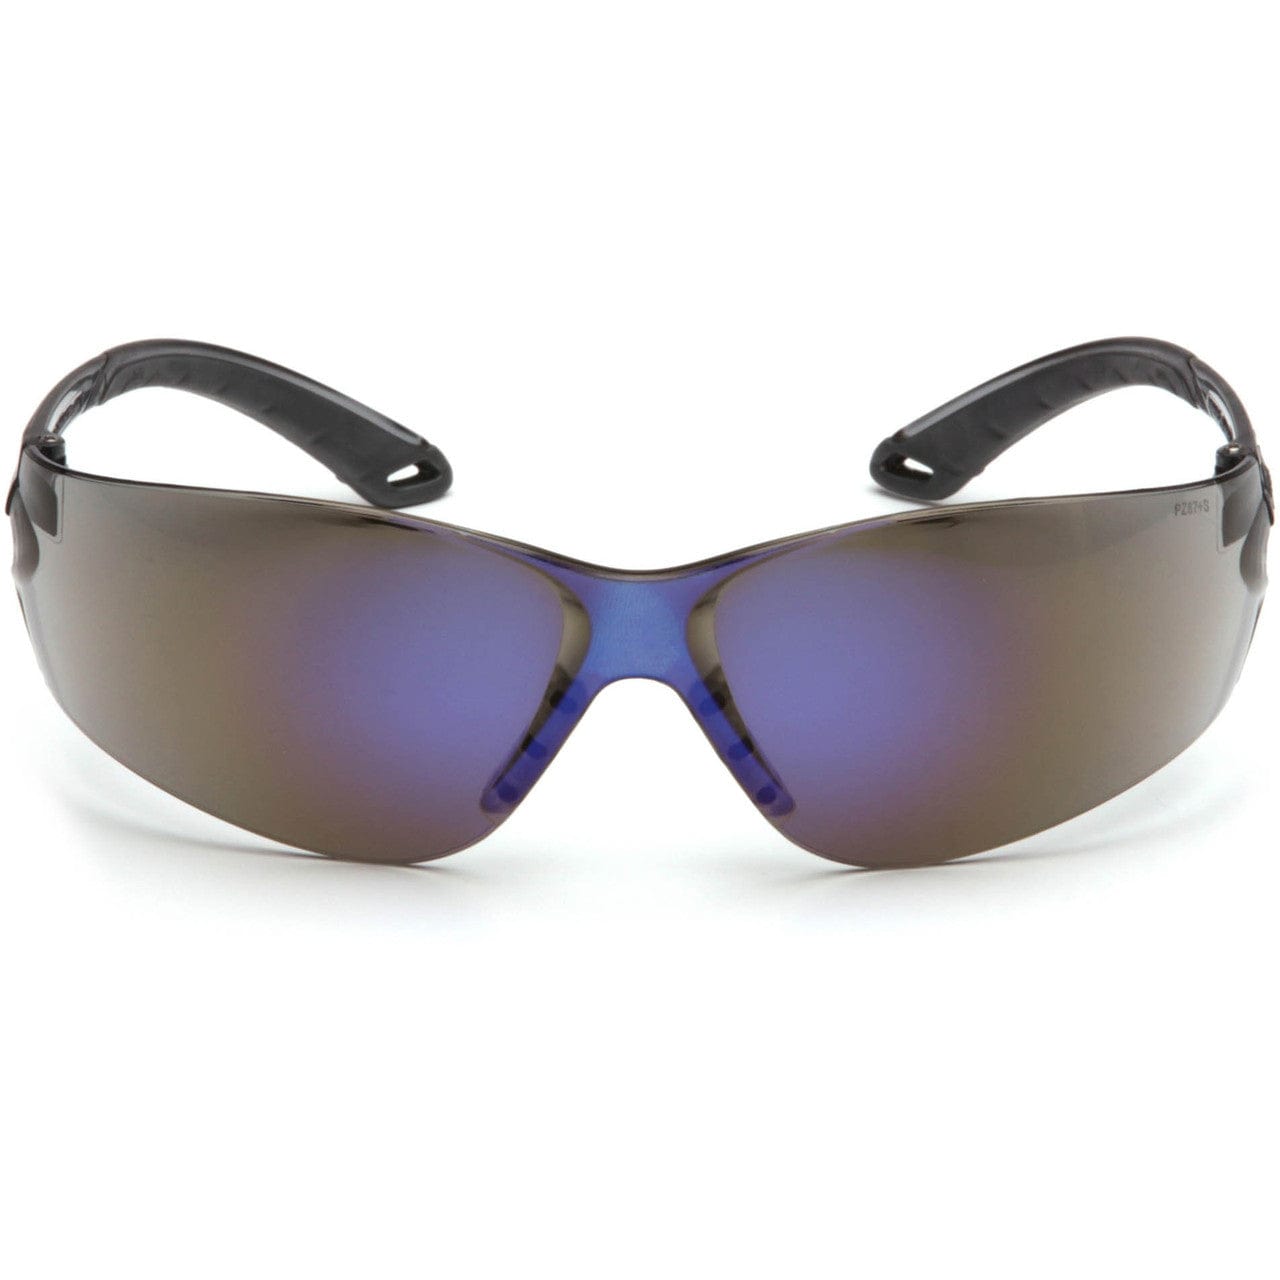 Pyramex Itek Safety Glasses with Blue Mirror Lens S5875S Front View